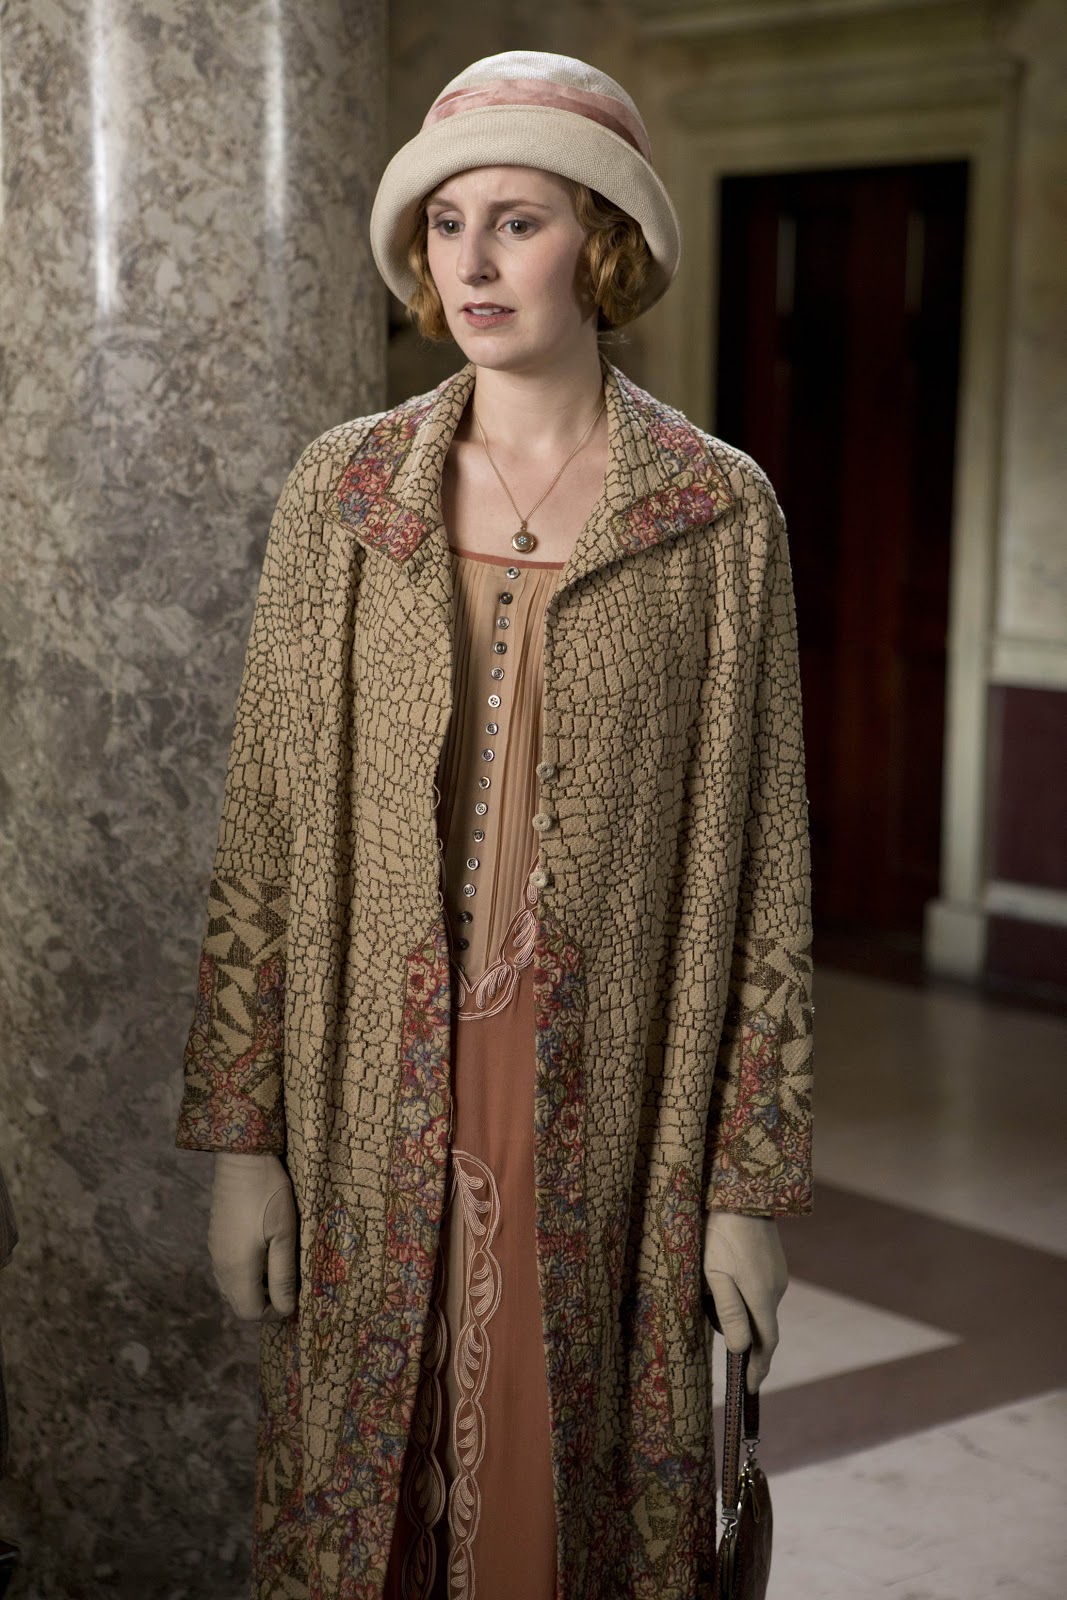 Confessions of a Seamstress: The Costumes of Downton Abbey - Season 3